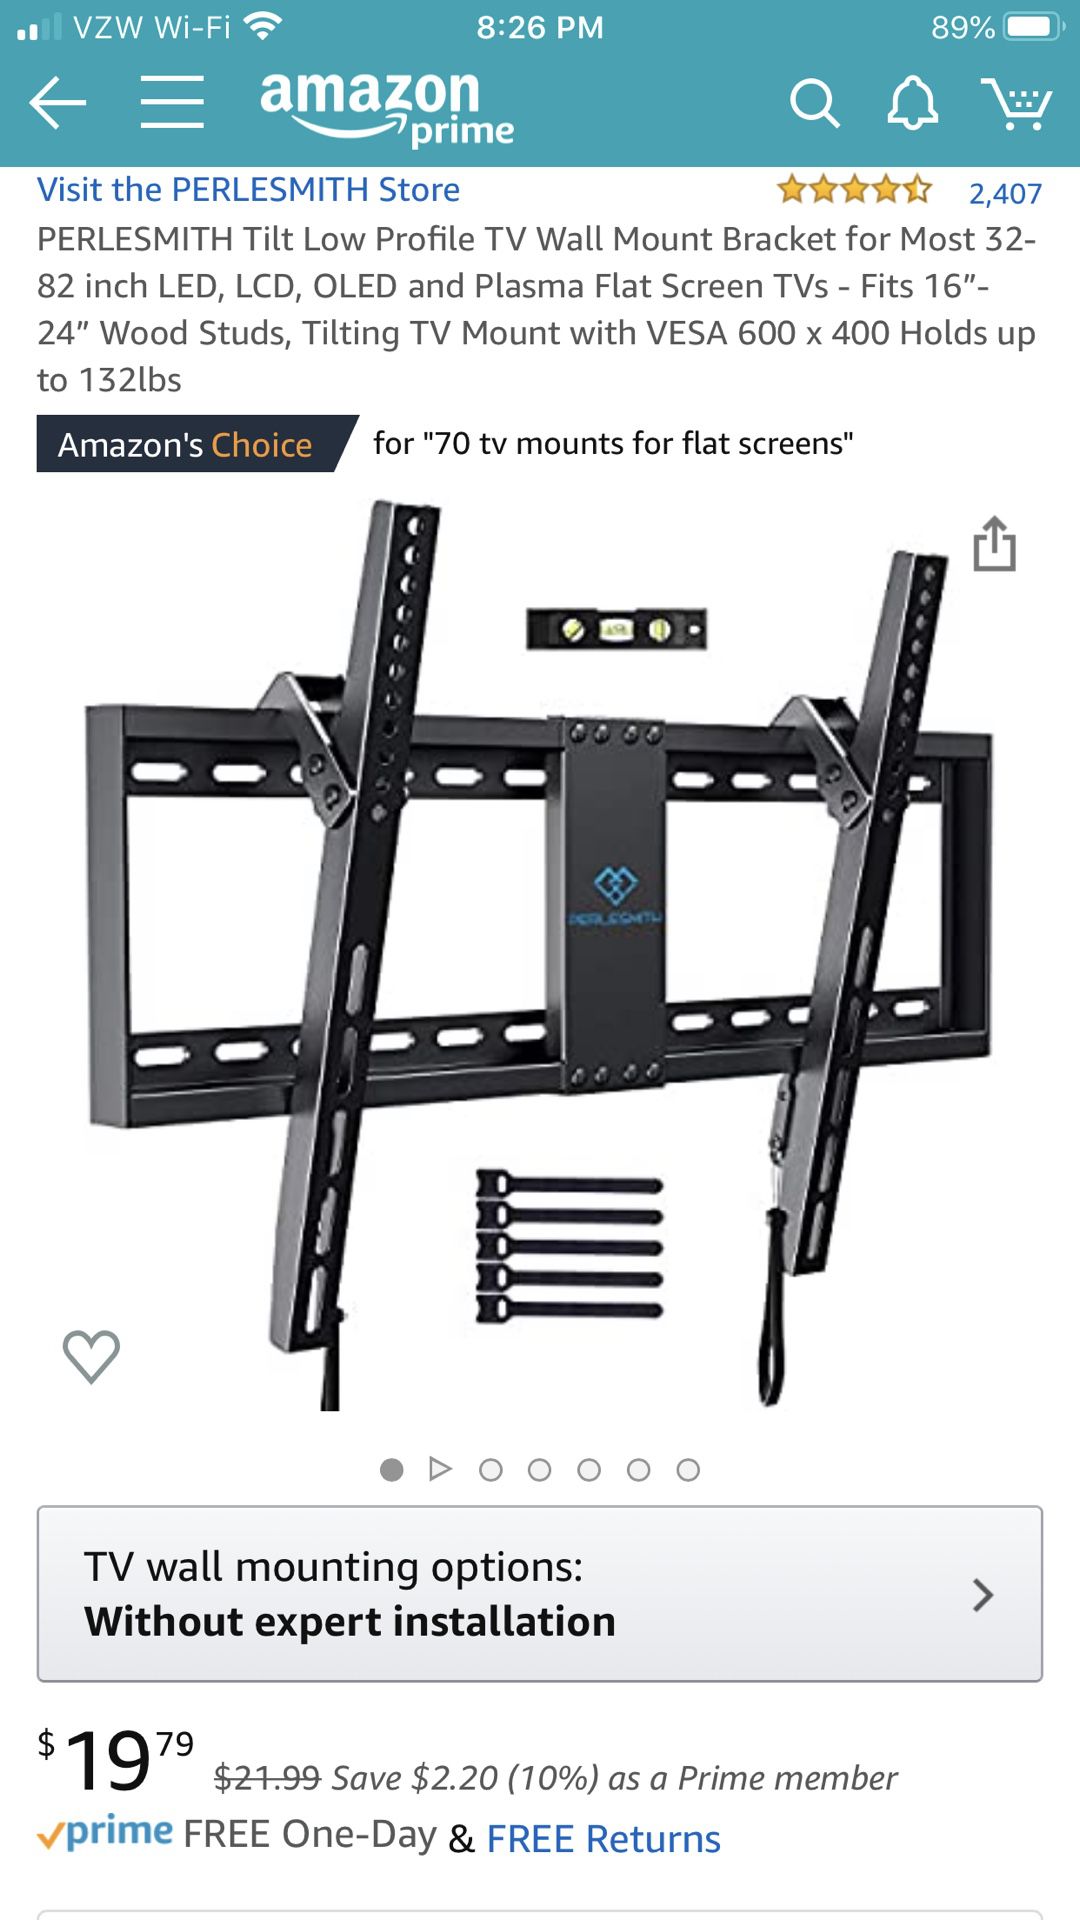 PERLESMITH Tilt Low Profile TV Wall Mount Bracket for Most 32-82 inch LED, LCD, OLED and Plasma Flat Screen TVs - Fits 16”- 24” Wood Studs, Tilting T